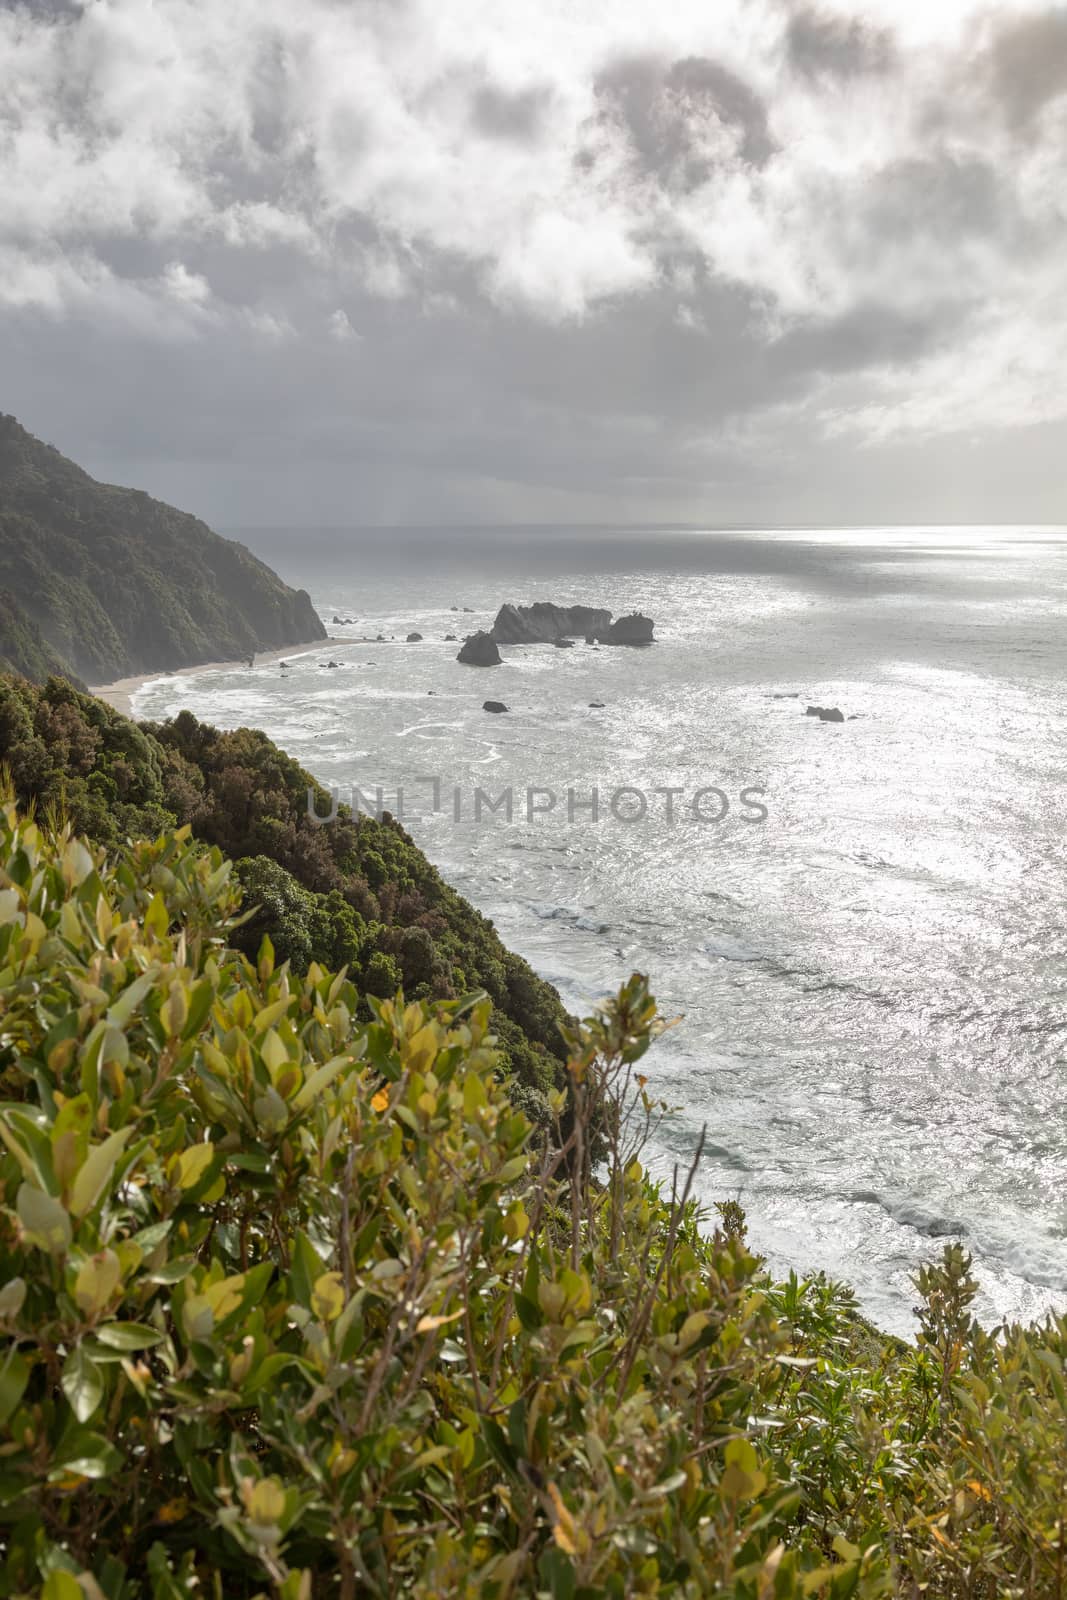 An image of a rough coast at New Zealand south